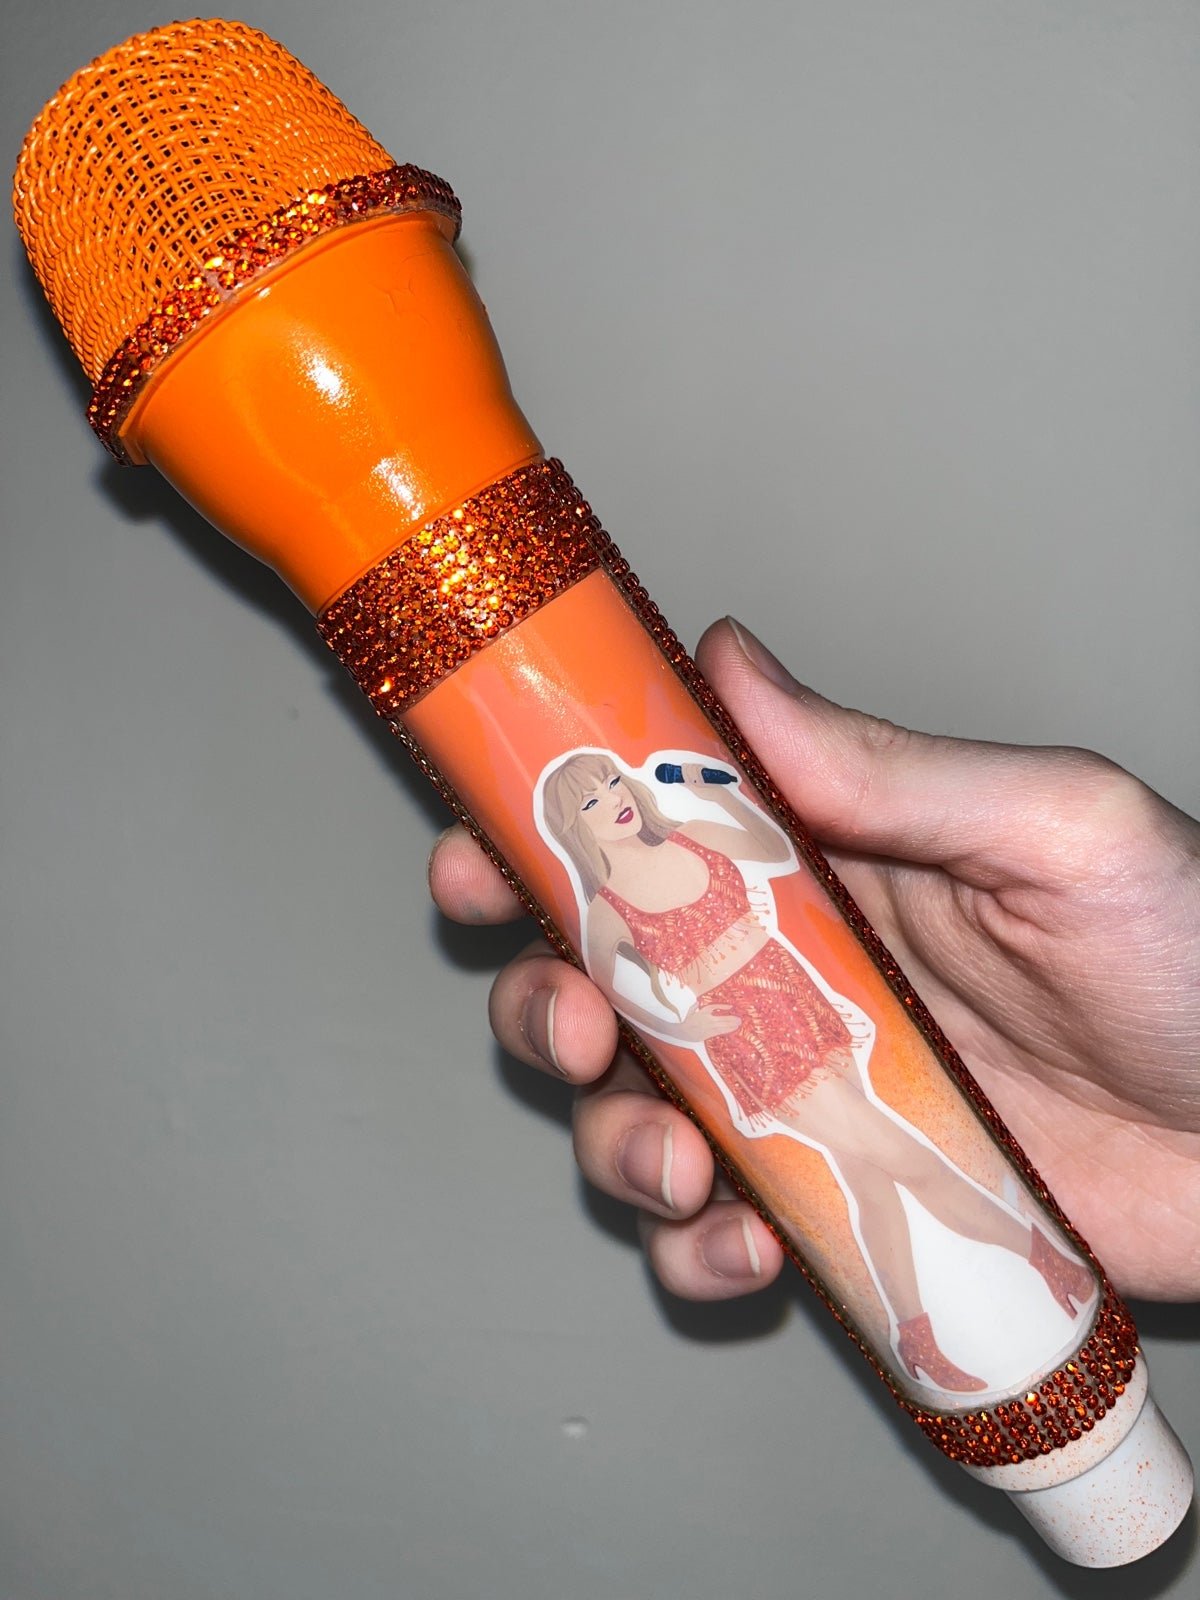 Taylor Swift Eras Tour 1989 Outfit Inspired Prop Mic - 